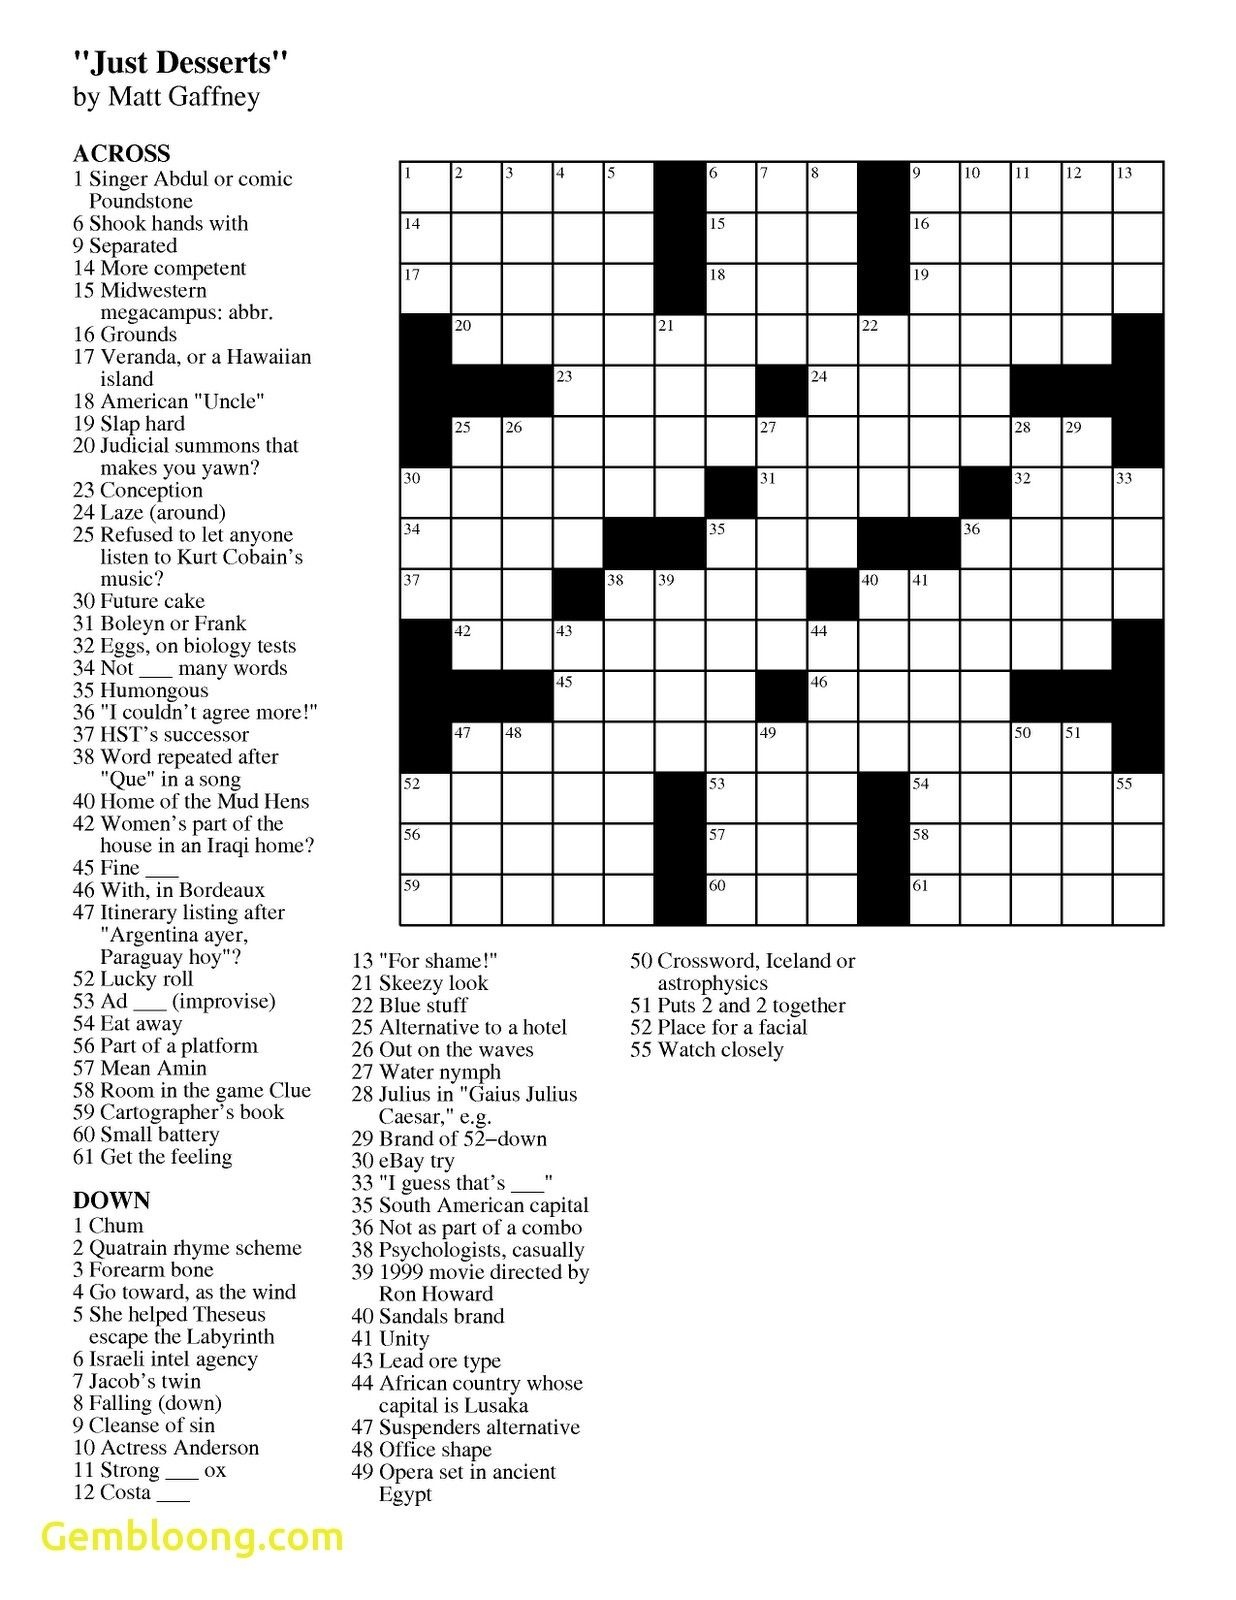 a-plagiarism-scandal-is-unfolding-in-the-crossword-world-usa-today